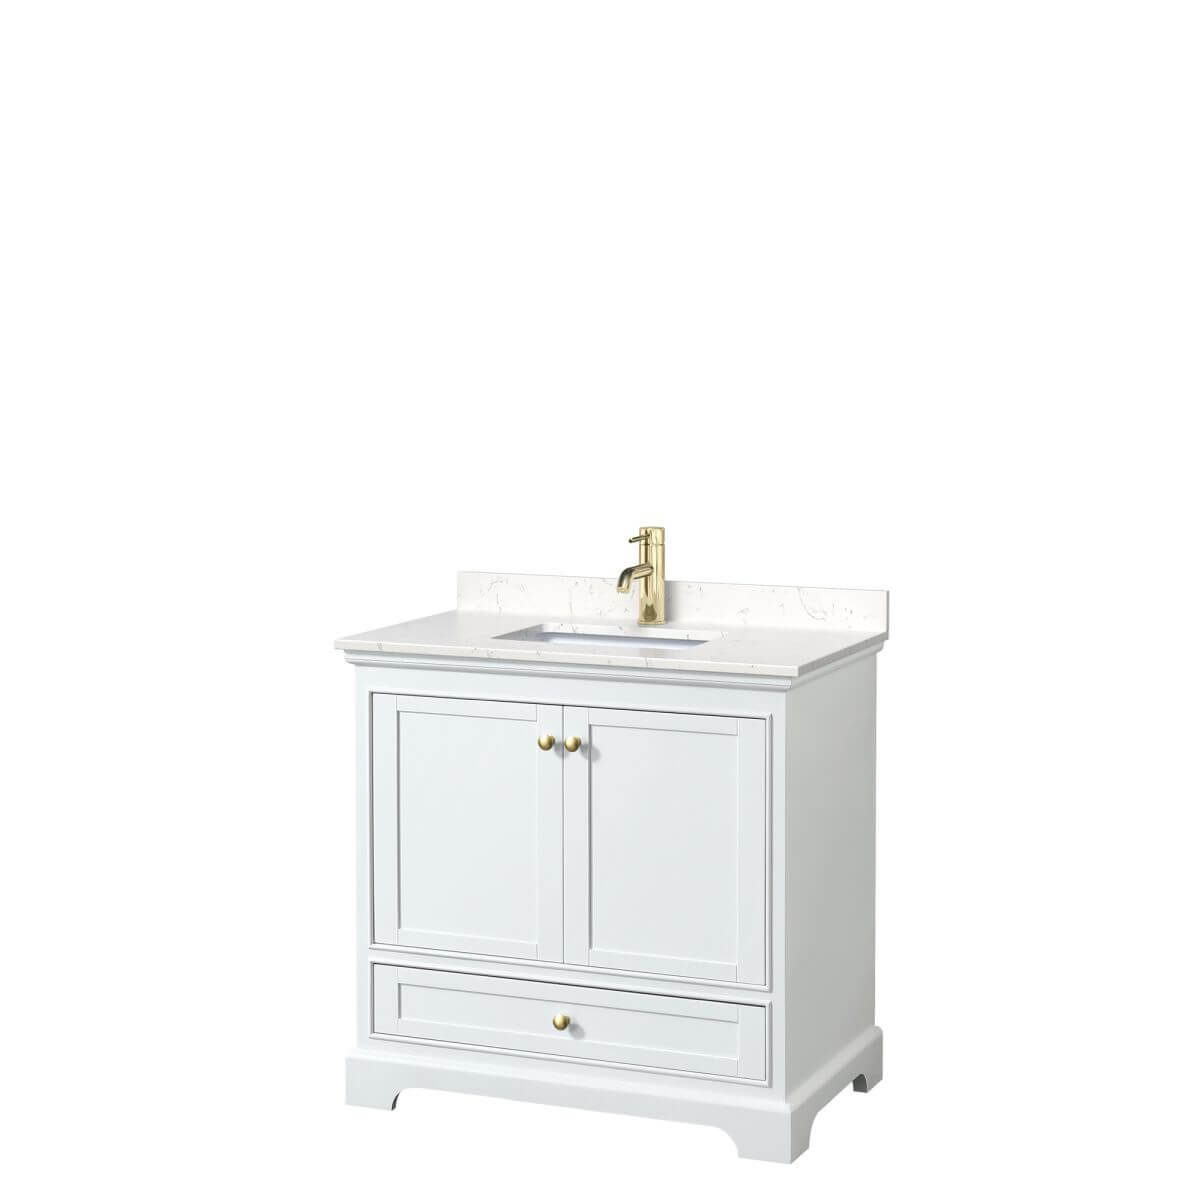 Wyndham Collection Deborah 36 inch Single Bathroom Vanity in White with Carrara Cultured Marble Countertop, Undermount Square Sink, Brushed Gold Trim and No Mirror - WCS202036SWGC2UNSMXX